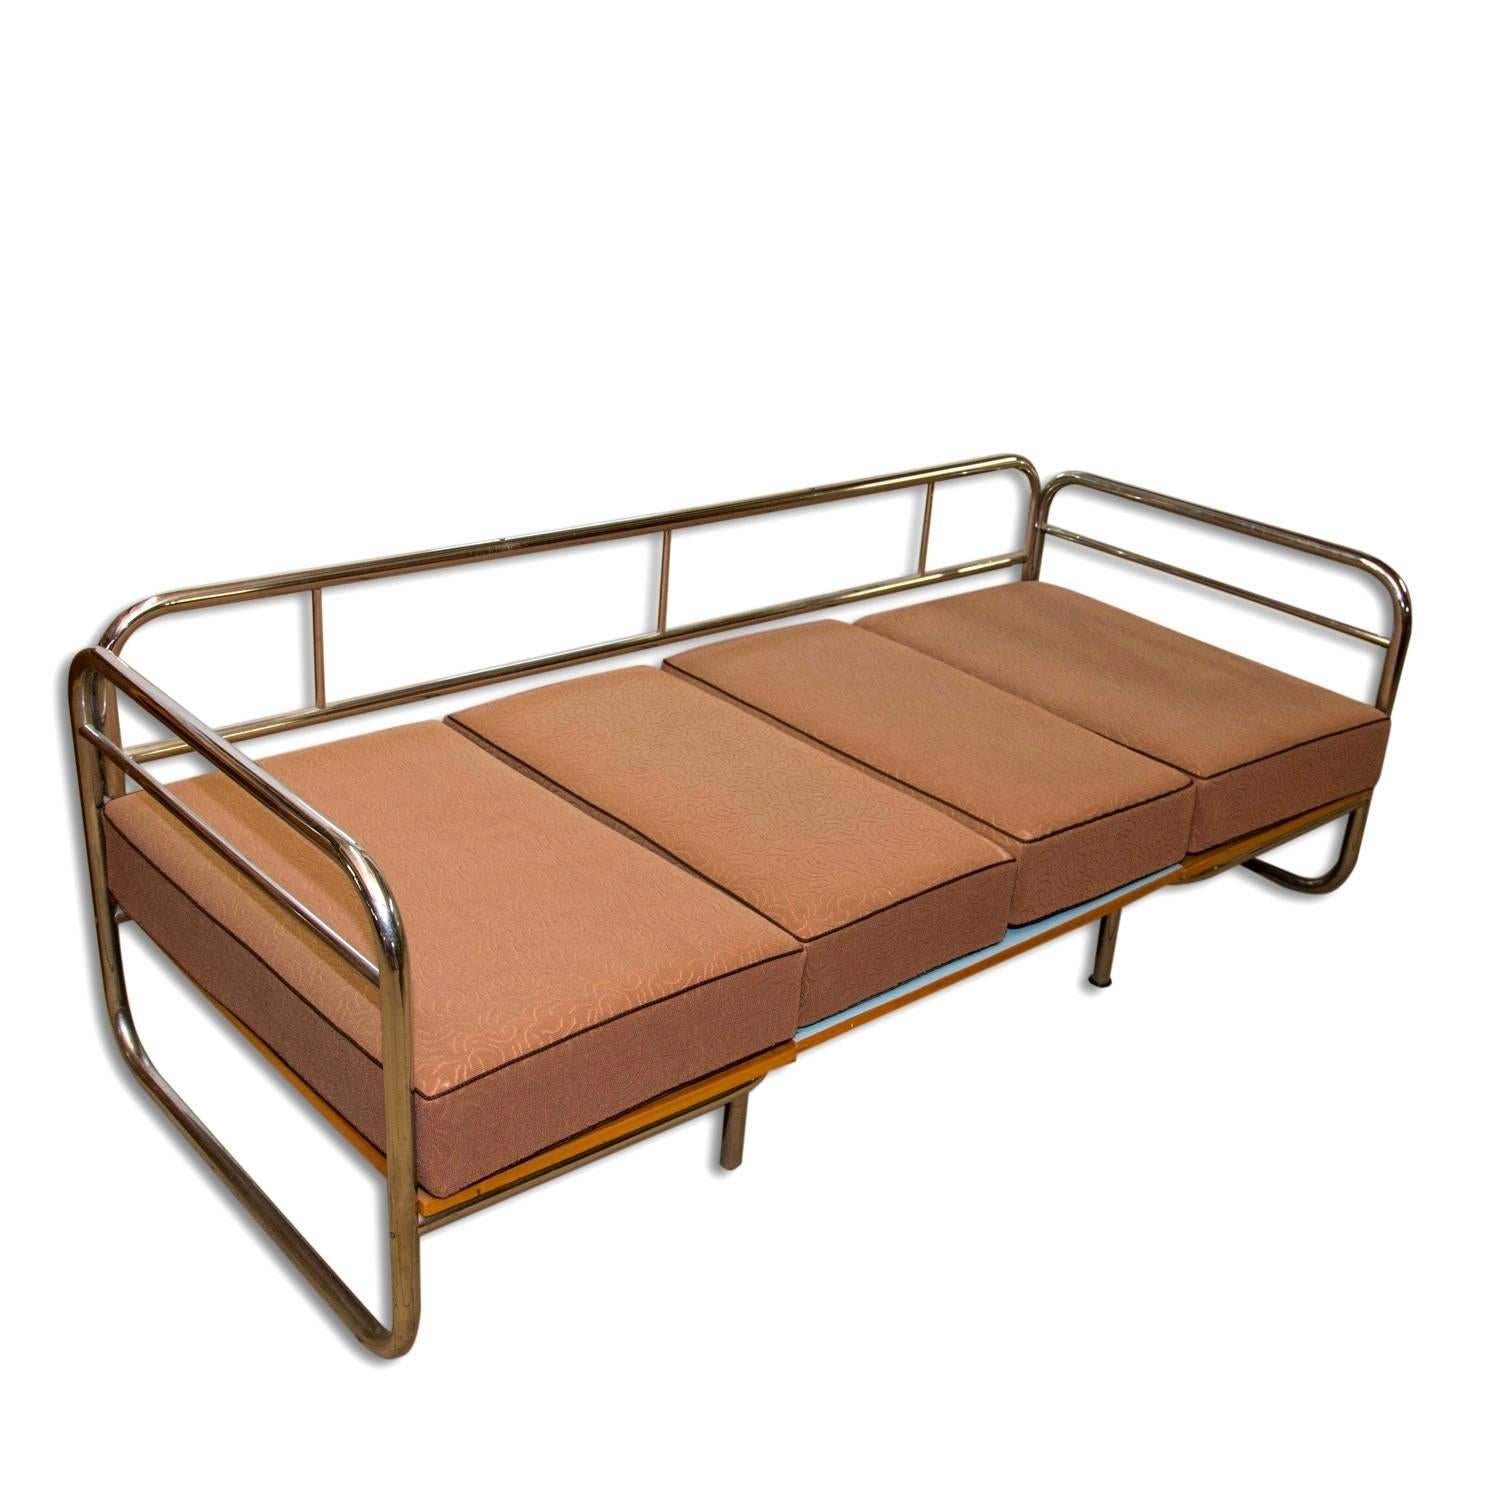 Czech Exceptional Functionalist Multipurpose Seating Set-Sofa Bed, 1950s